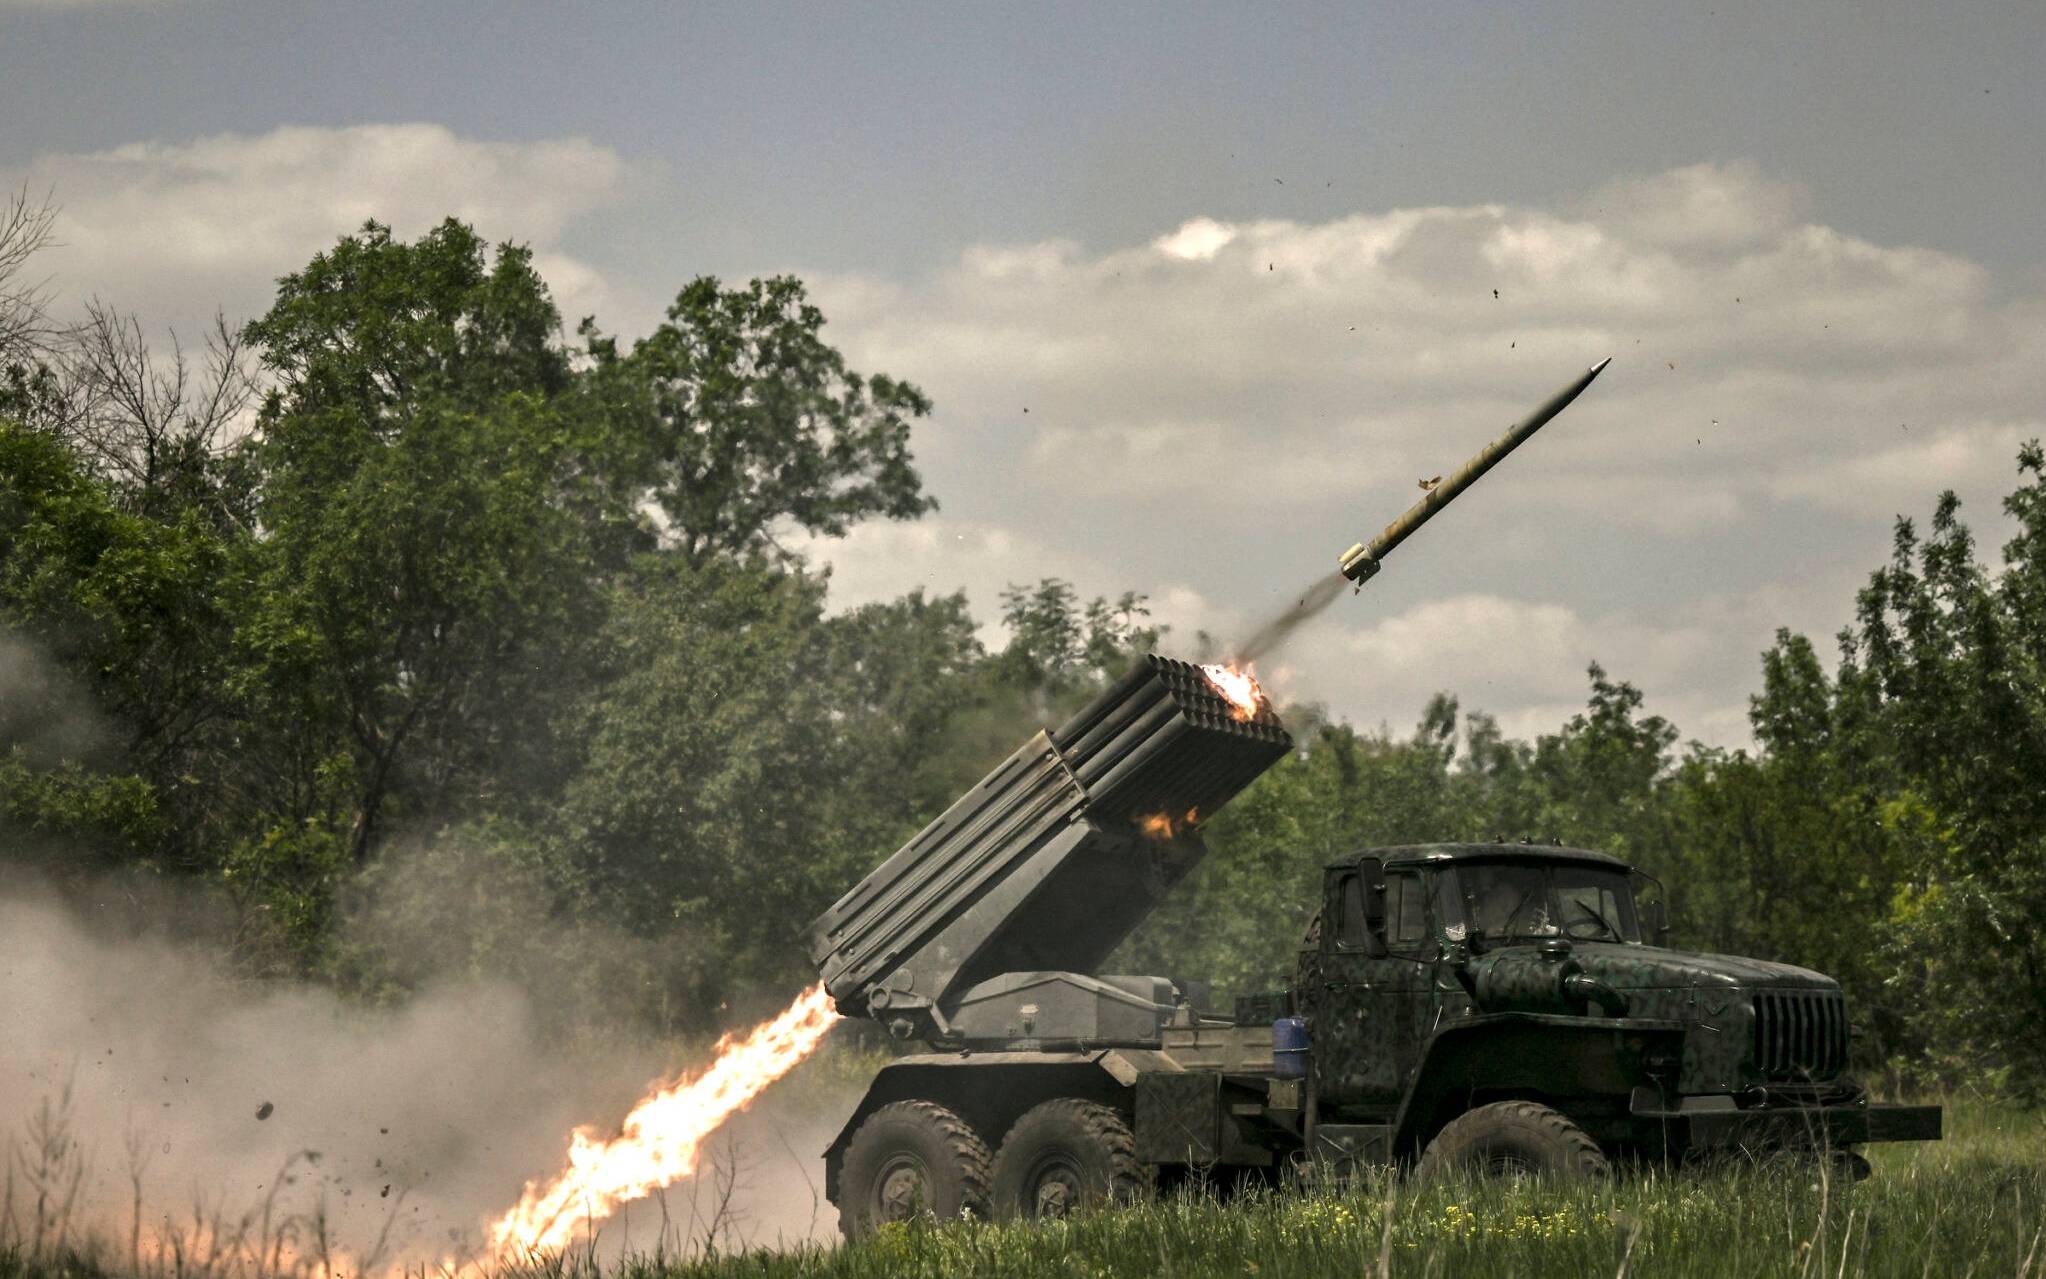 Ukrainian troops fire with surface-to-surface rockets MLRS towards Russian positions at a front line in the eastern Ukrainian region of Donbas on June 7, 2022. (Photo by ARIS MESSINIS / AFP)